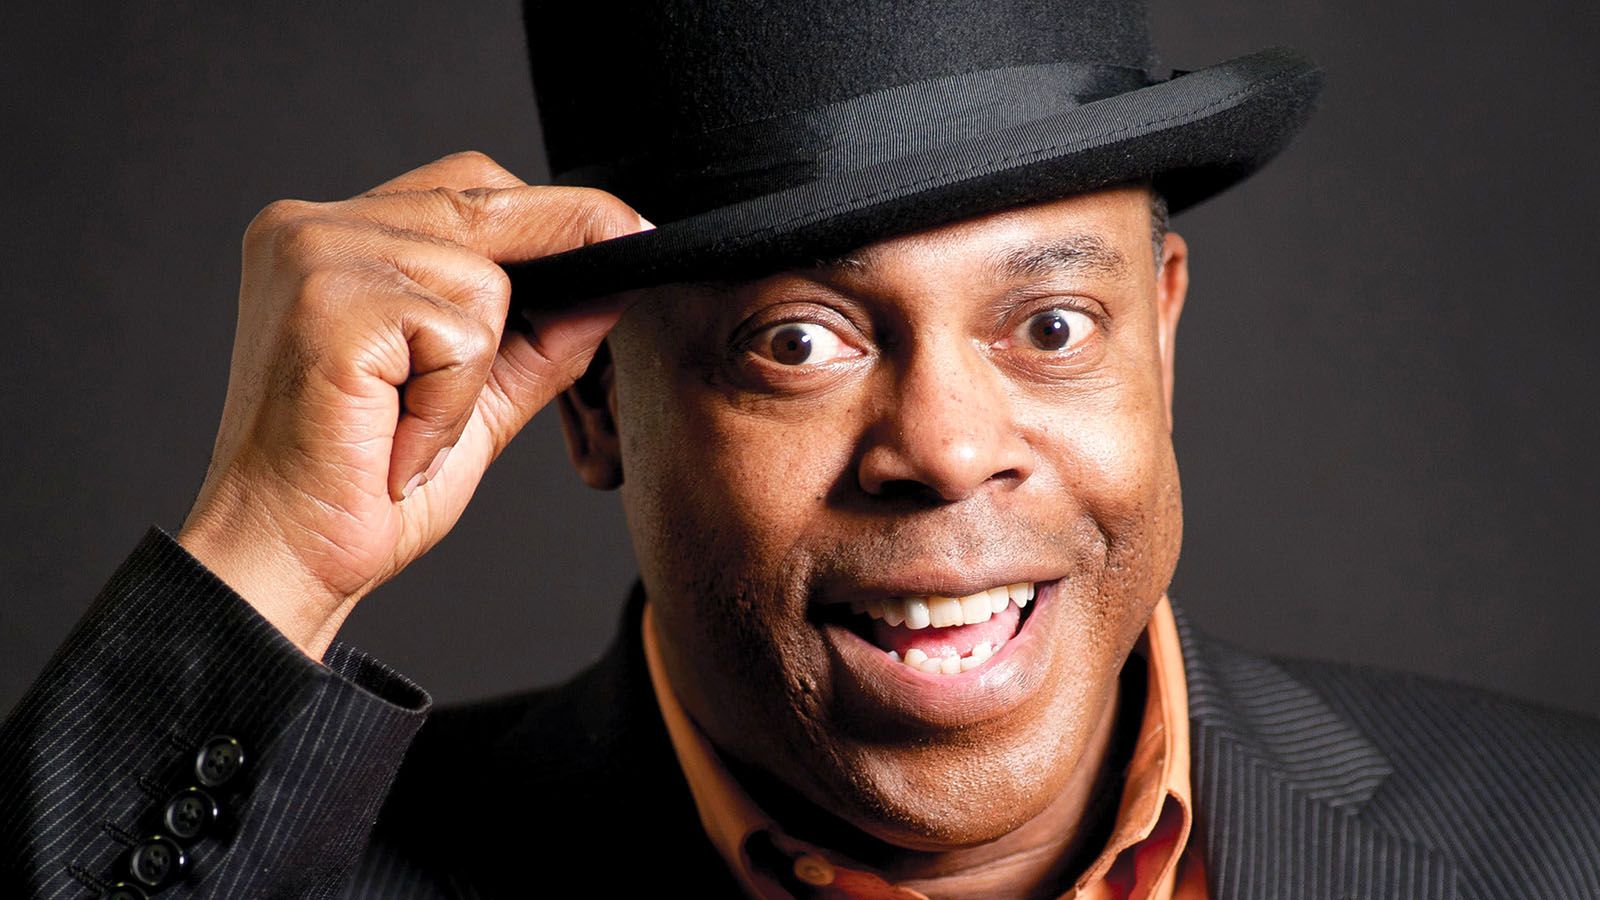 Michael Winslow will be at Summit City Comedy Club, April 13-15.